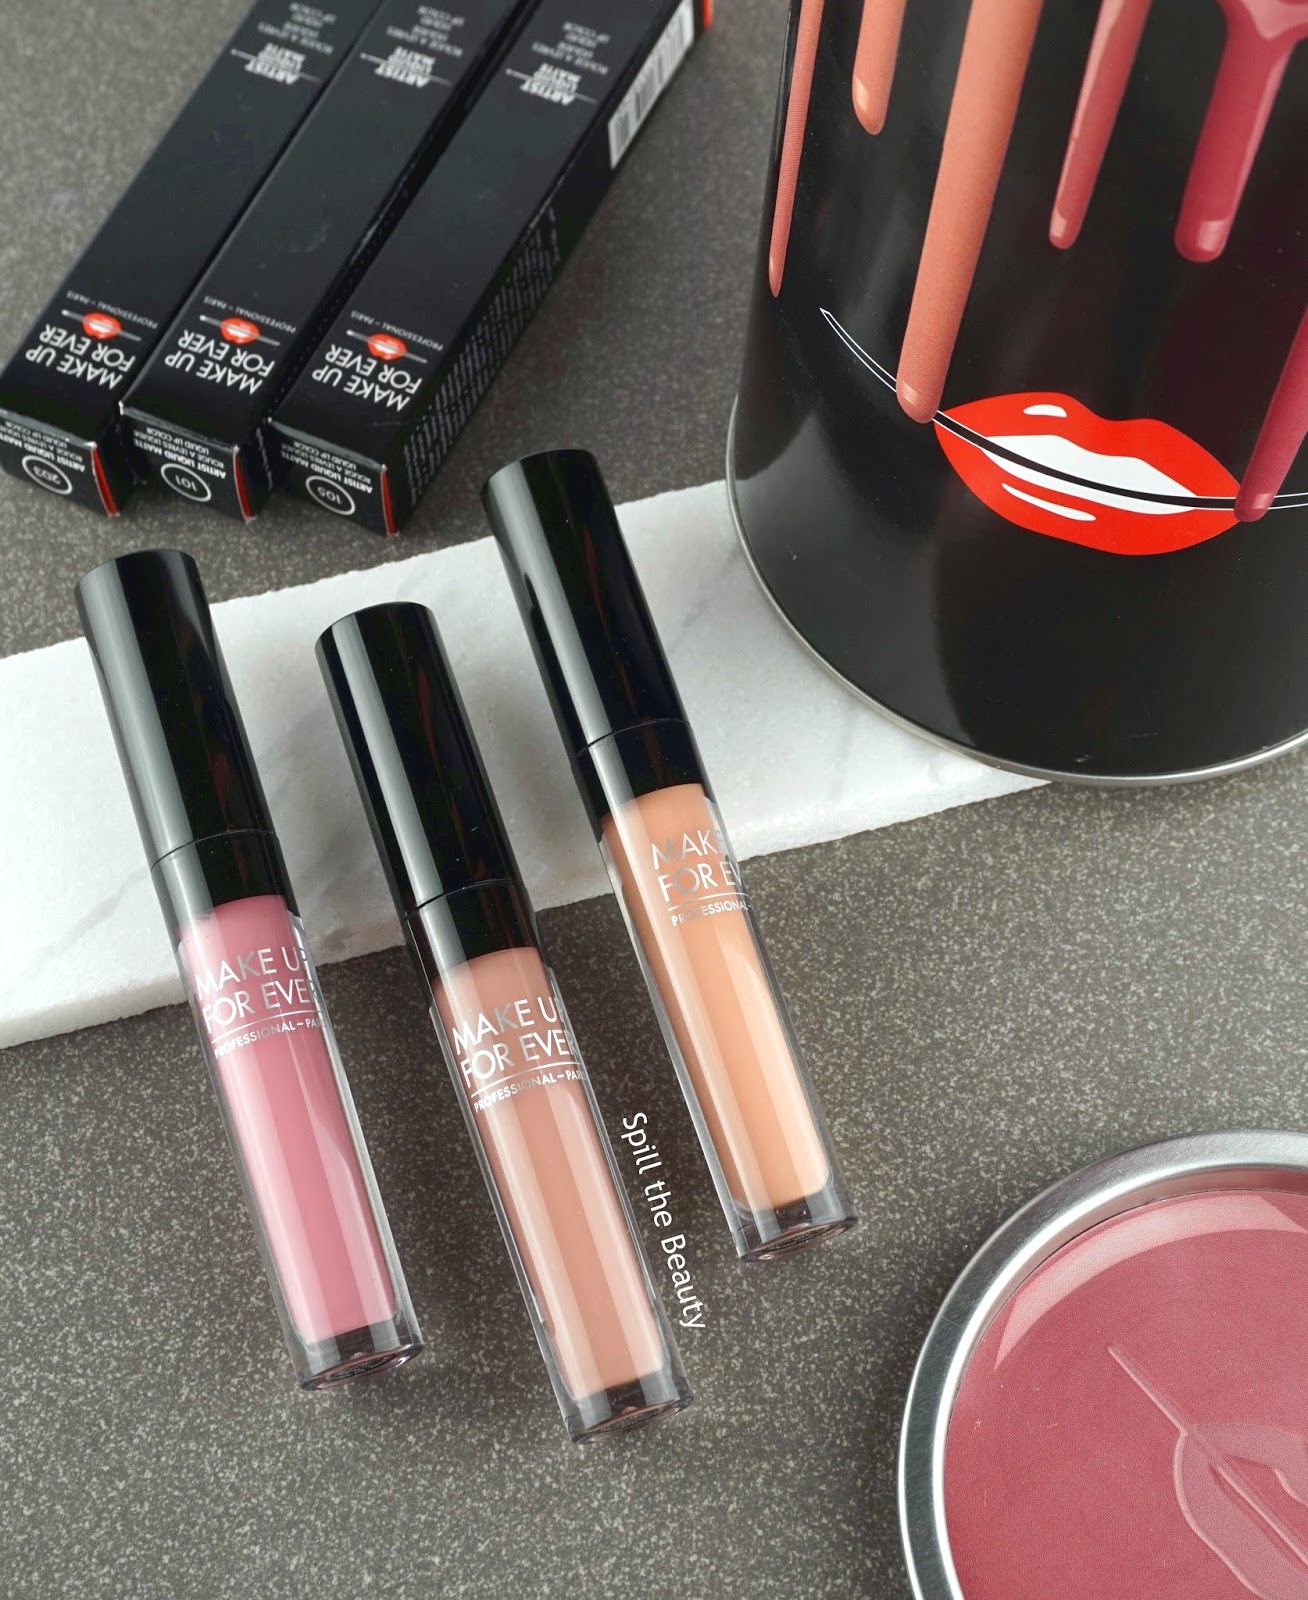 MAKE UP FOR EVER Artist Liquid Matte – Review, Swatches, and Looks